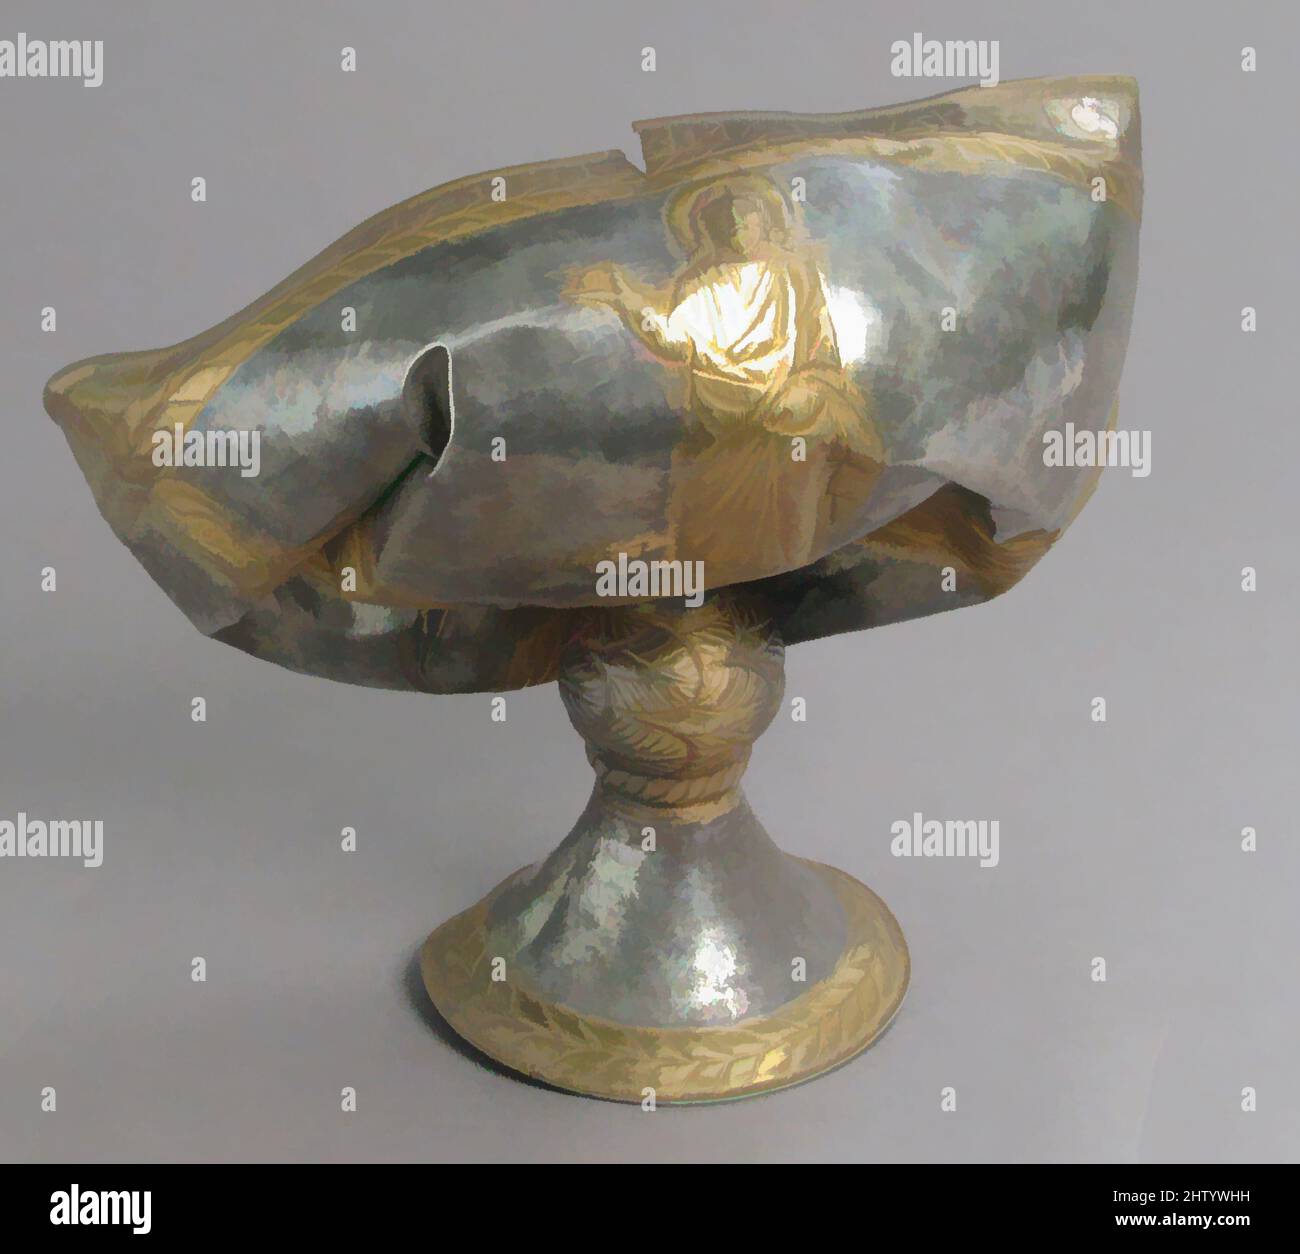 Art inspired by The Attarouthi Treasure - Chalice, 500–650, Made in Attarouthi, Syria, Byzantine, Silver and gilded silver, Overall: 6 15/16 x 9 3/8 x 5 11/16 in. (17.6 x 23.8 x 14.4 cm), Metalwork-Potin, These well-wrought liturgical objects-chalices, censers, a strainer, and a, Classic works modernized by Artotop with a splash of modernity. Shapes, color and value, eye-catching visual impact on art. Emotions through freedom of artworks in a contemporary way. A timeless message pursuing a wildly creative new direction. Artists turning to the digital medium and creating the Artotop NFT Stock Photo